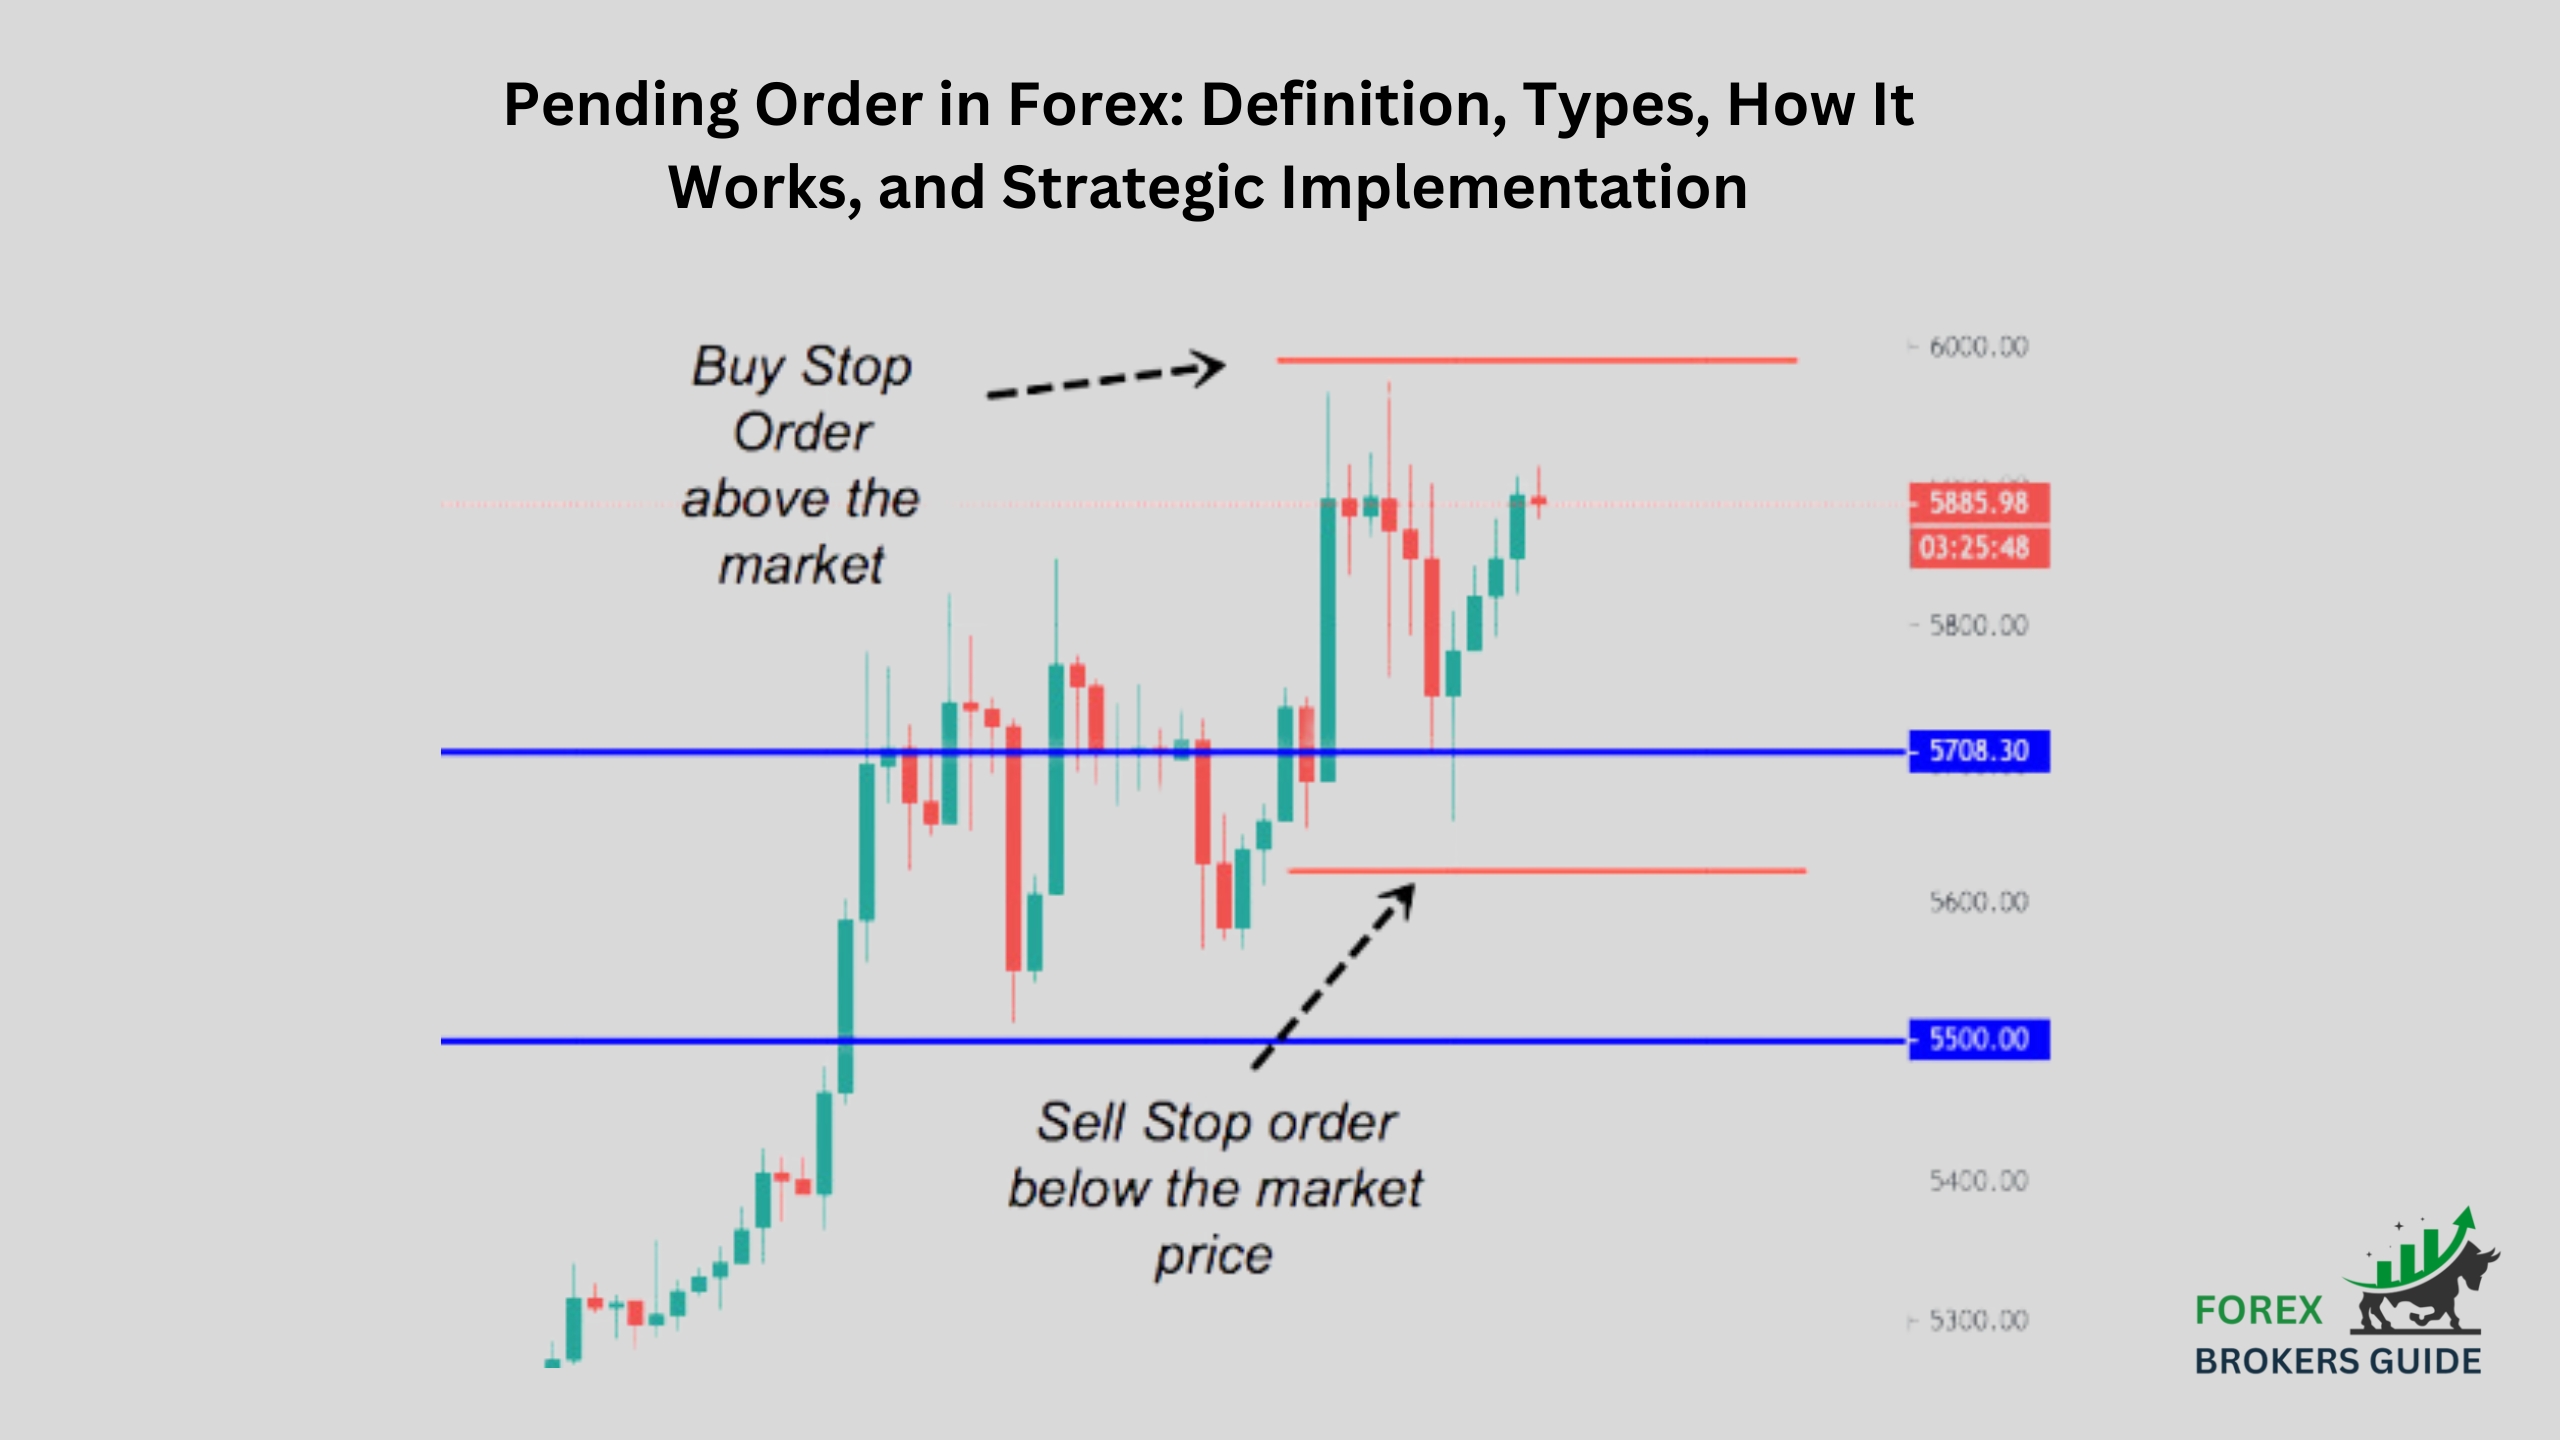 Pending Order in Forex Definition, Types, How It Works, and Strategic Implementation